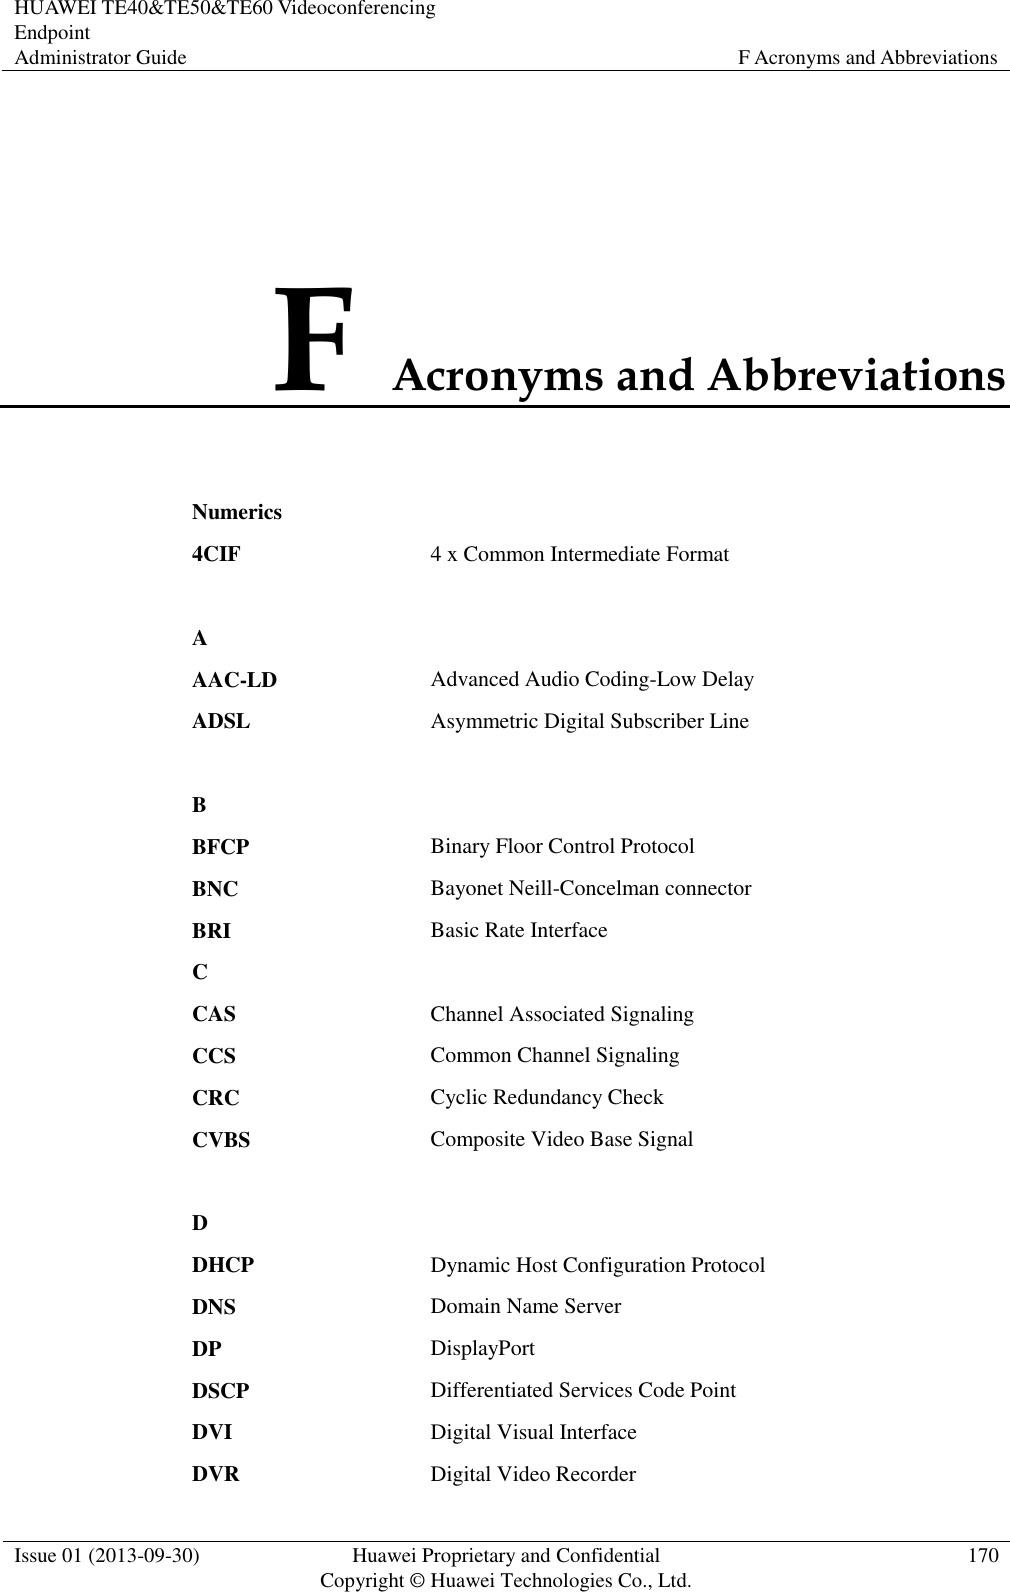 HUAWEI TE40&amp;TE50&amp;TE60 Videoconferencing Endpoint Administrator Guide F Acronyms and Abbreviations  Issue 01 (2013-09-30) Huawei Proprietary and Confidential                                     Copyright © Huawei Technologies Co., Ltd. 170  F Acronyms and Abbreviations Numerics  4CIF 4 x Common Intermediate Format   A  AAC-LD Advanced Audio Coding-Low Delay ADSL Asymmetric Digital Subscriber Line   B  BFCP Binary Floor Control Protocol BNC Bayonet Neill-Concelman connector BRI Basic Rate Interface C  CAS Channel Associated Signaling CCS Common Channel Signaling CRC Cyclic Redundancy Check CVBS Composite Video Base Signal   D  DHCP Dynamic Host Configuration Protocol DNS Domain Name Server DP DisplayPort DSCP Differentiated Services Code Point DVI Digital Visual Interface DVR Digital Video Recorder 